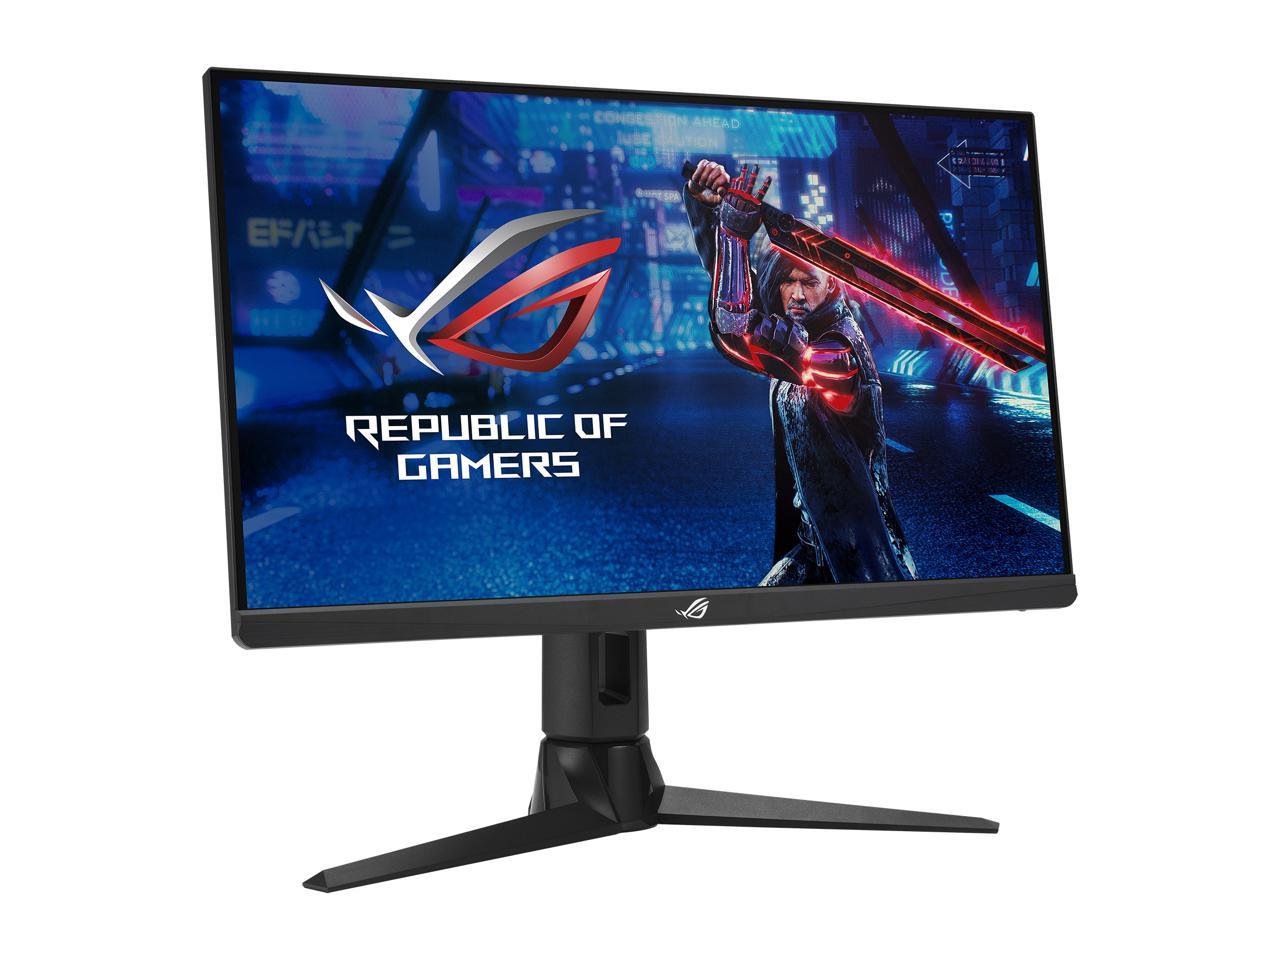 ASUS ROG Strix 24.5" 1080P HDR Gaming Monitor (XG259CM) - Full HD, Fast IPS, 240Hz, 1ms, Extreme Low Motion Blur Sync, G-Sync Compatible, KVM Support, Tripod Socket for Webcam, USB Type-C, DisplayPort